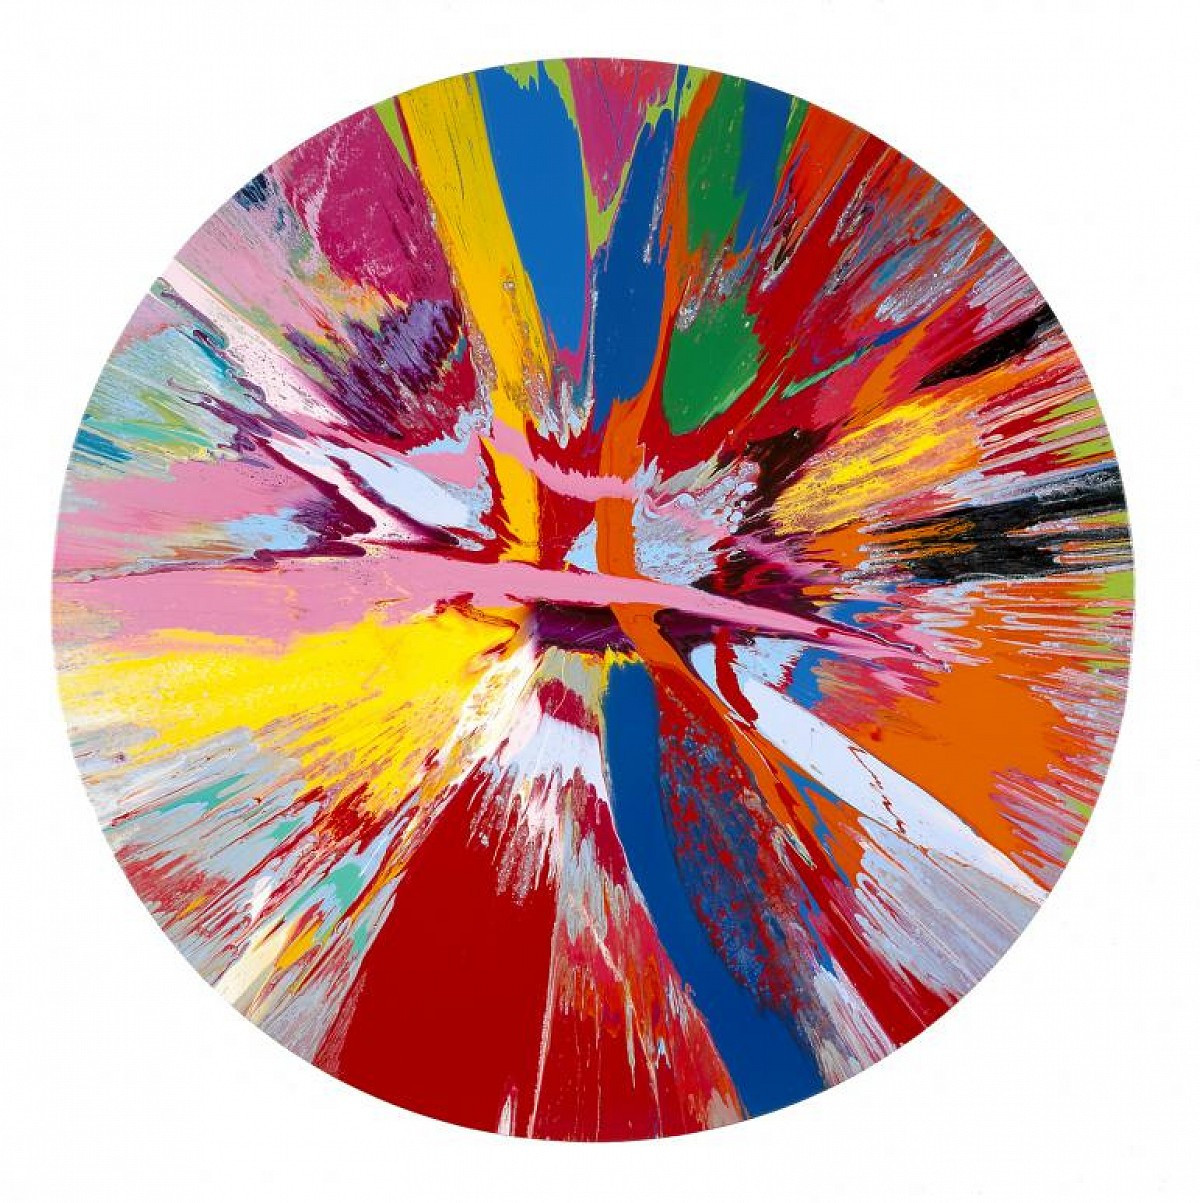 Spin Painting, 1997